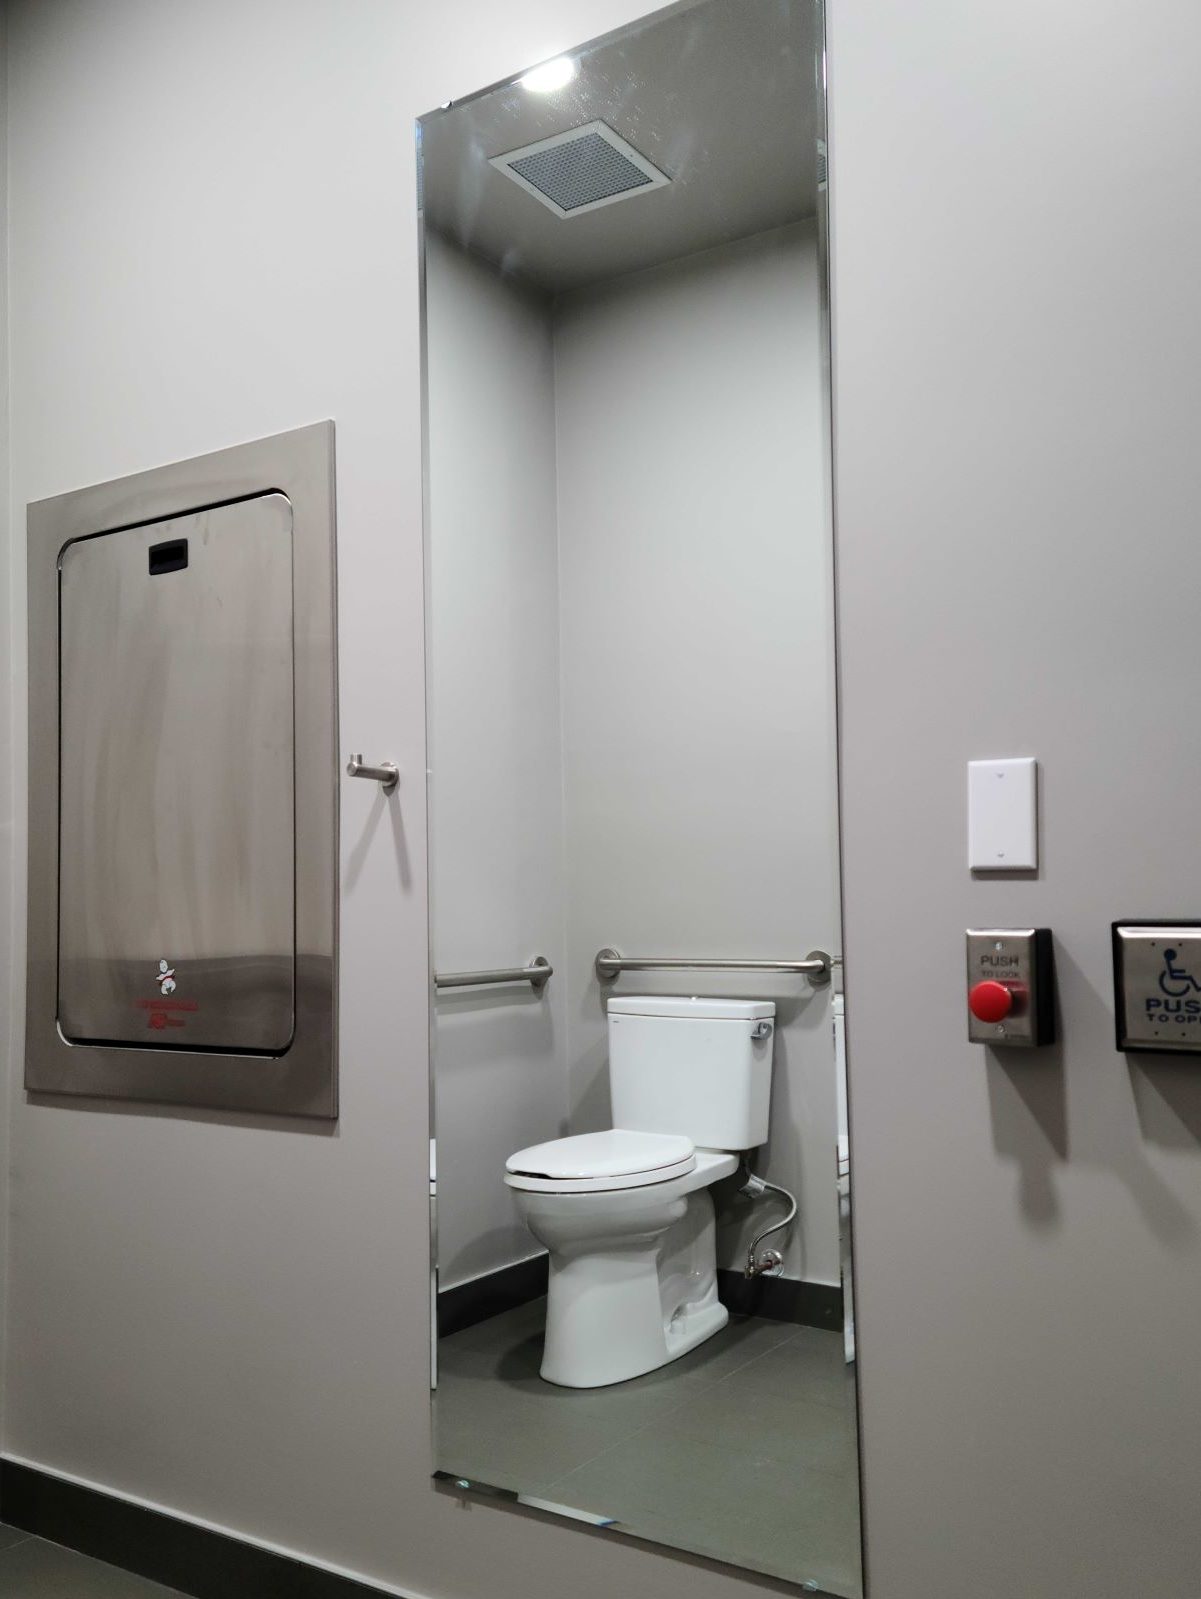 Restroom wall featuring changing table, clothing hook, full-length mirror, and large buttons for opening or locking the door